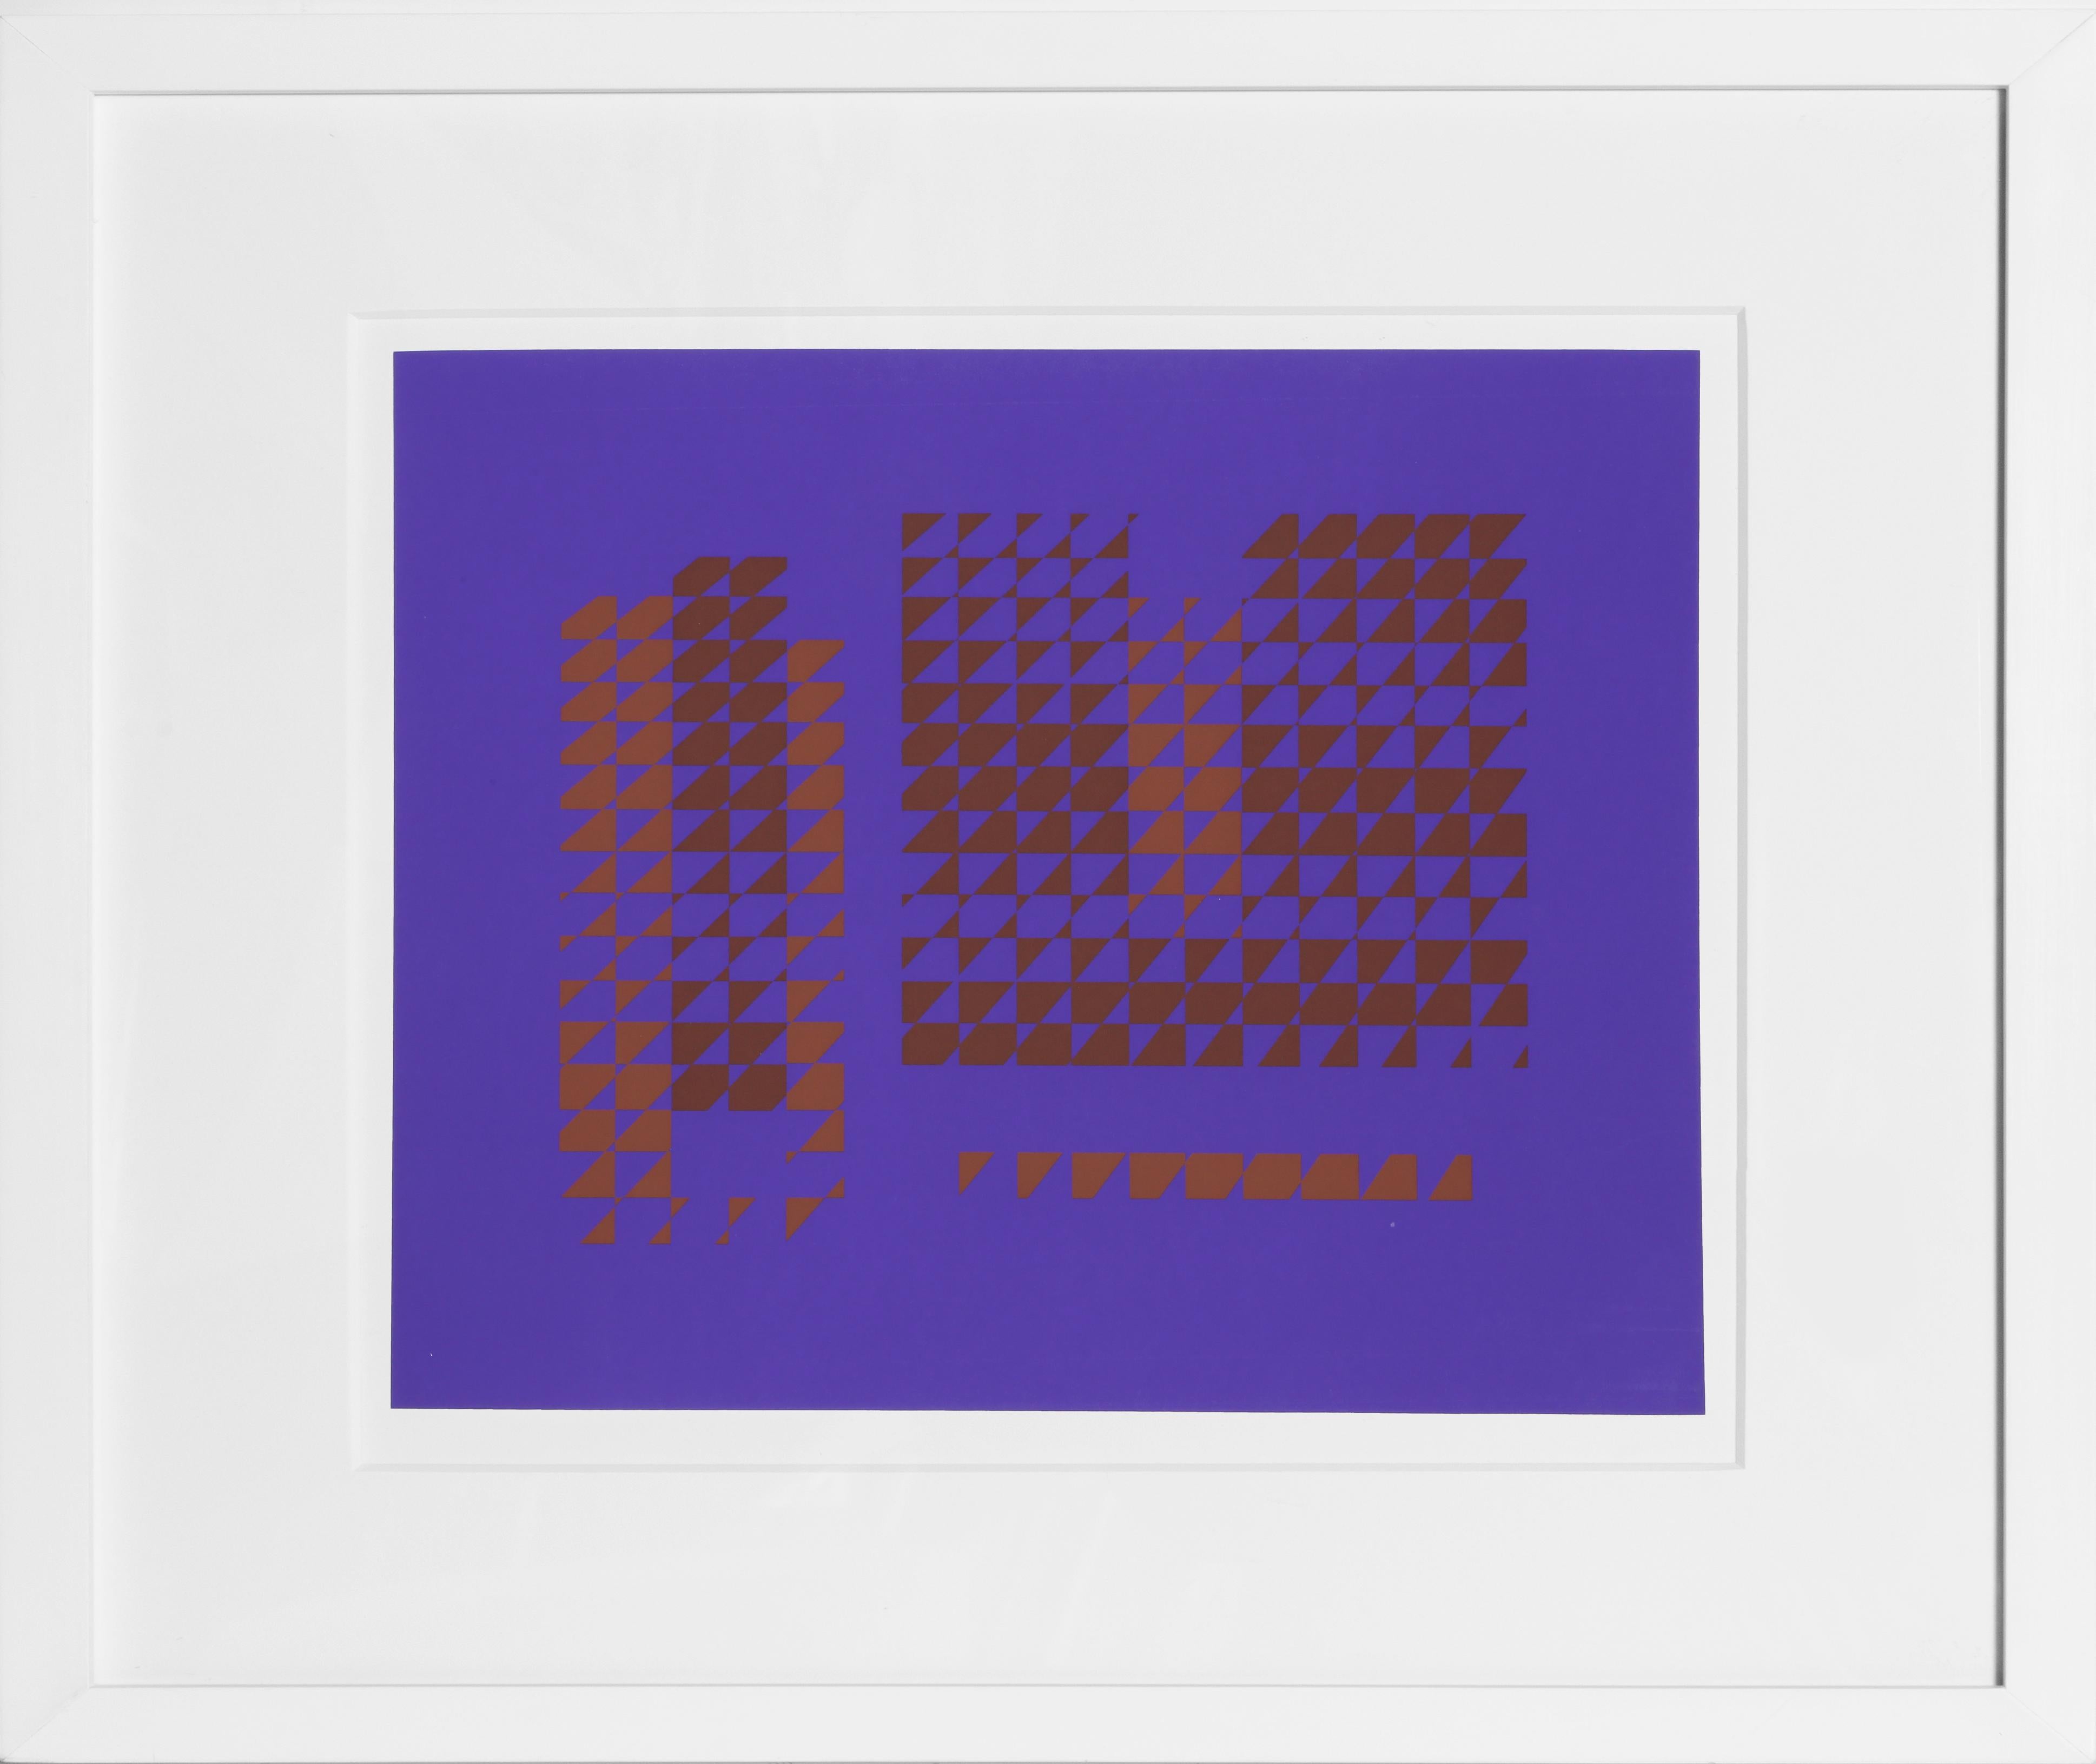 From the portfolio “Formulation: Articulation” created by Josef Albers in 1972. This monumental series consists of 127 original silkscreens that are a definitive survey of the artists most important color and shape theories. A copy of the colophon